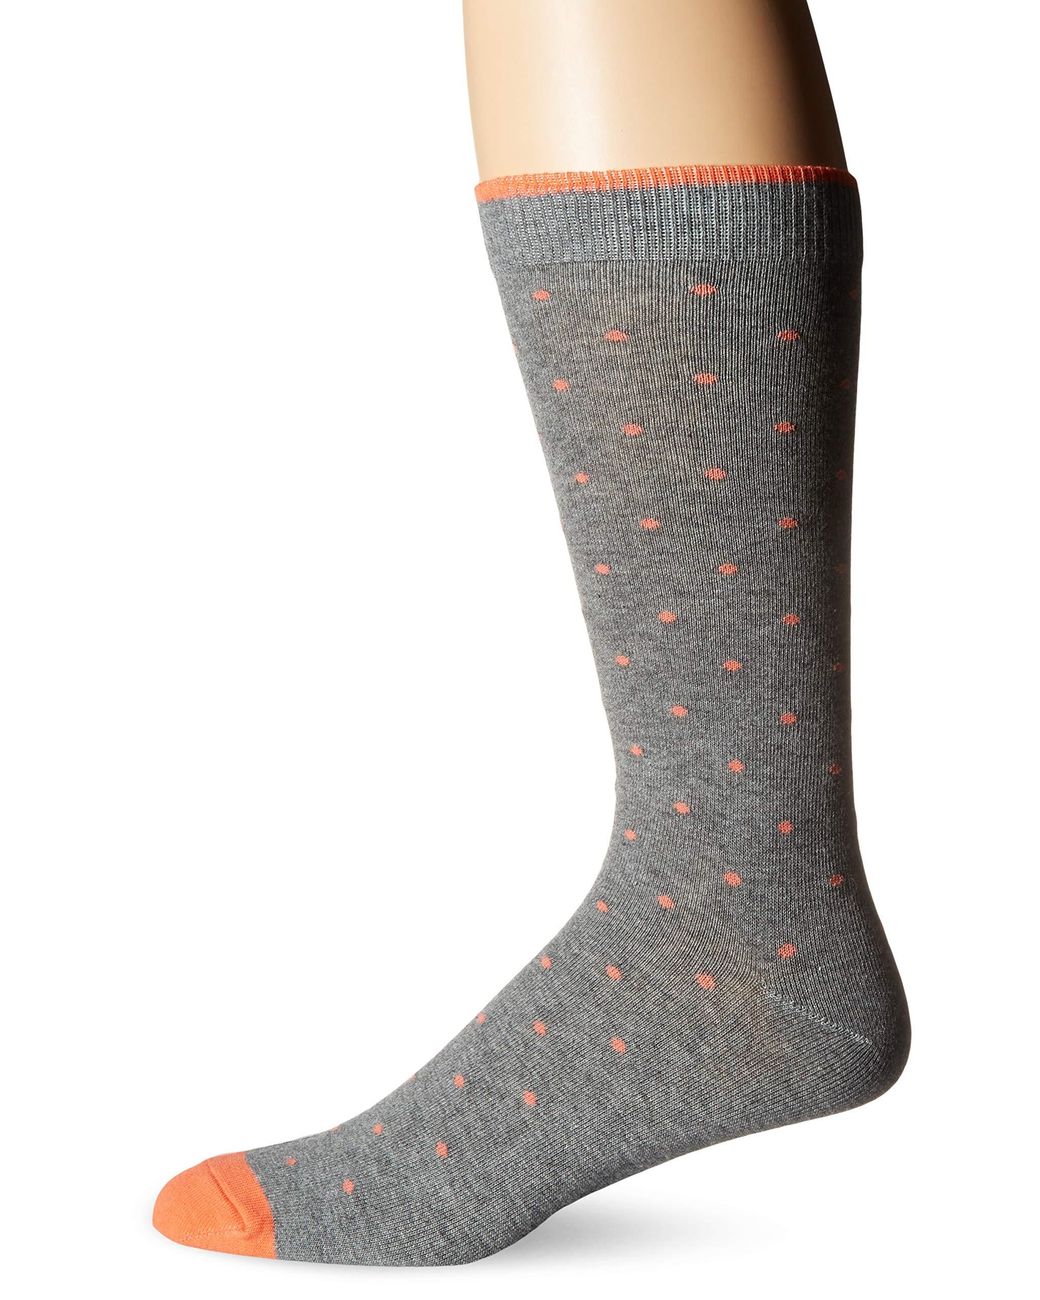 UGG Mini Dot Crew Sock in Charcoal Heather (Gray) for Men - Lyst